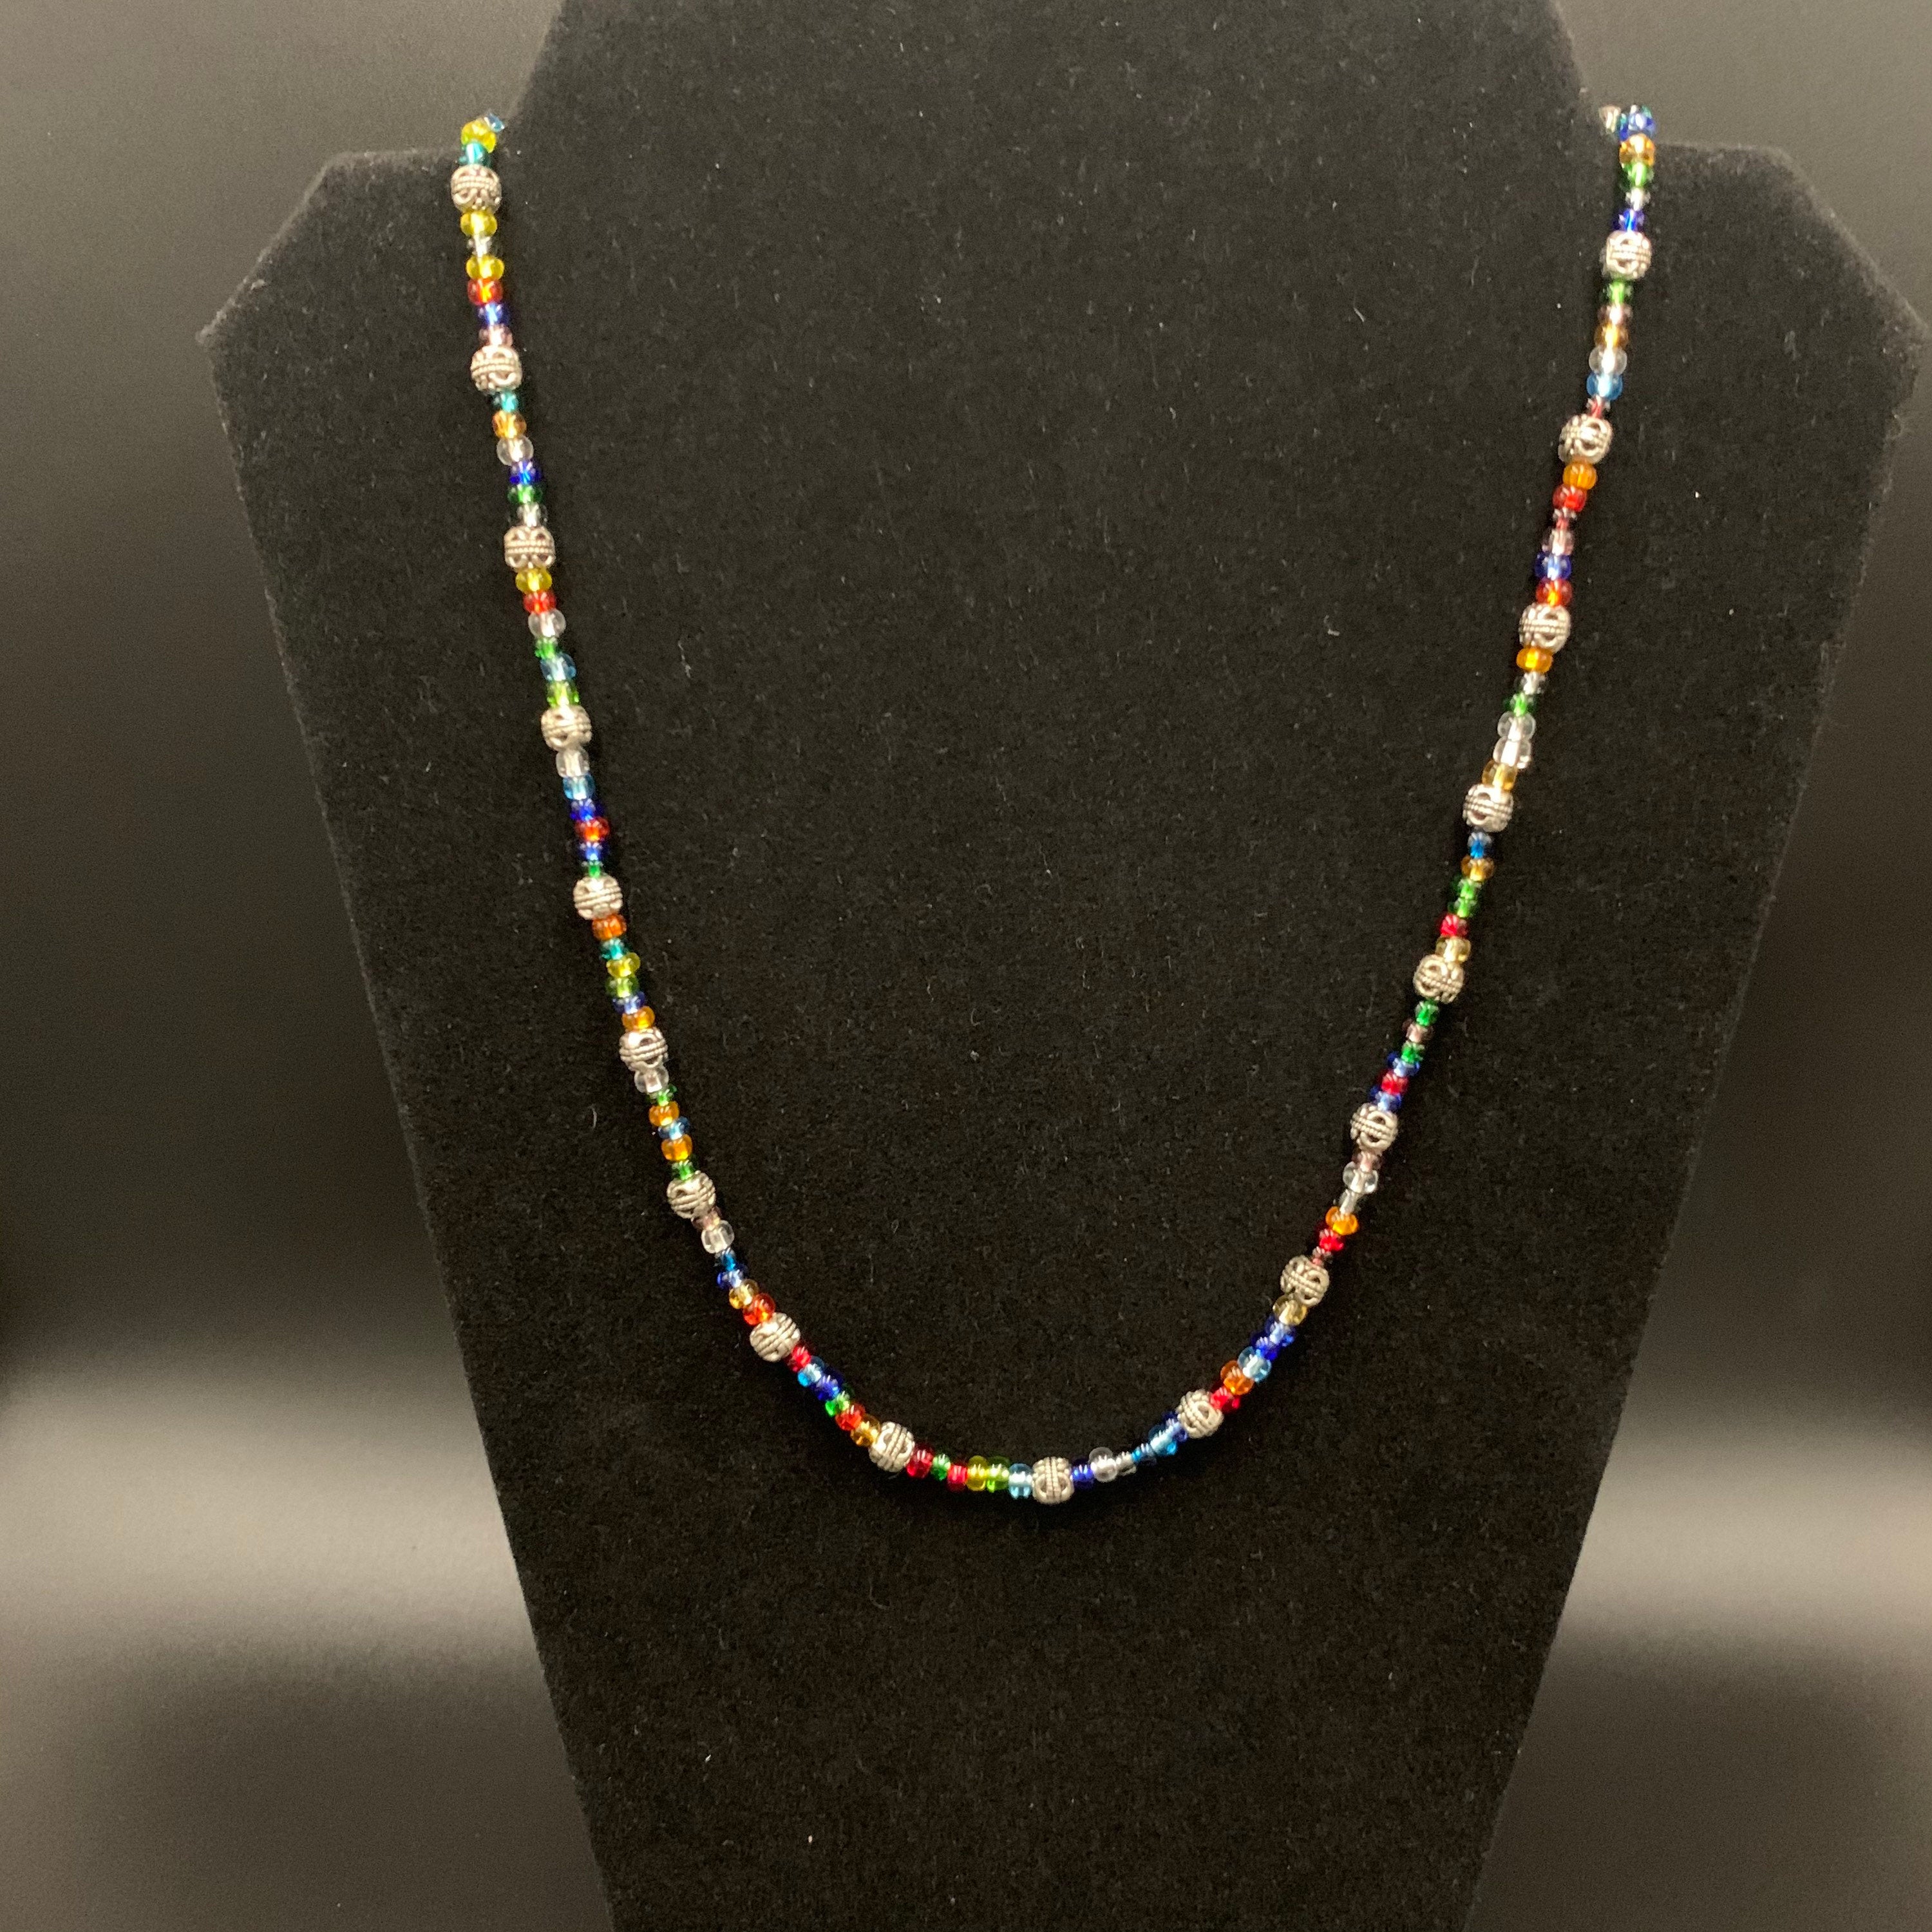 Necklace of Colors